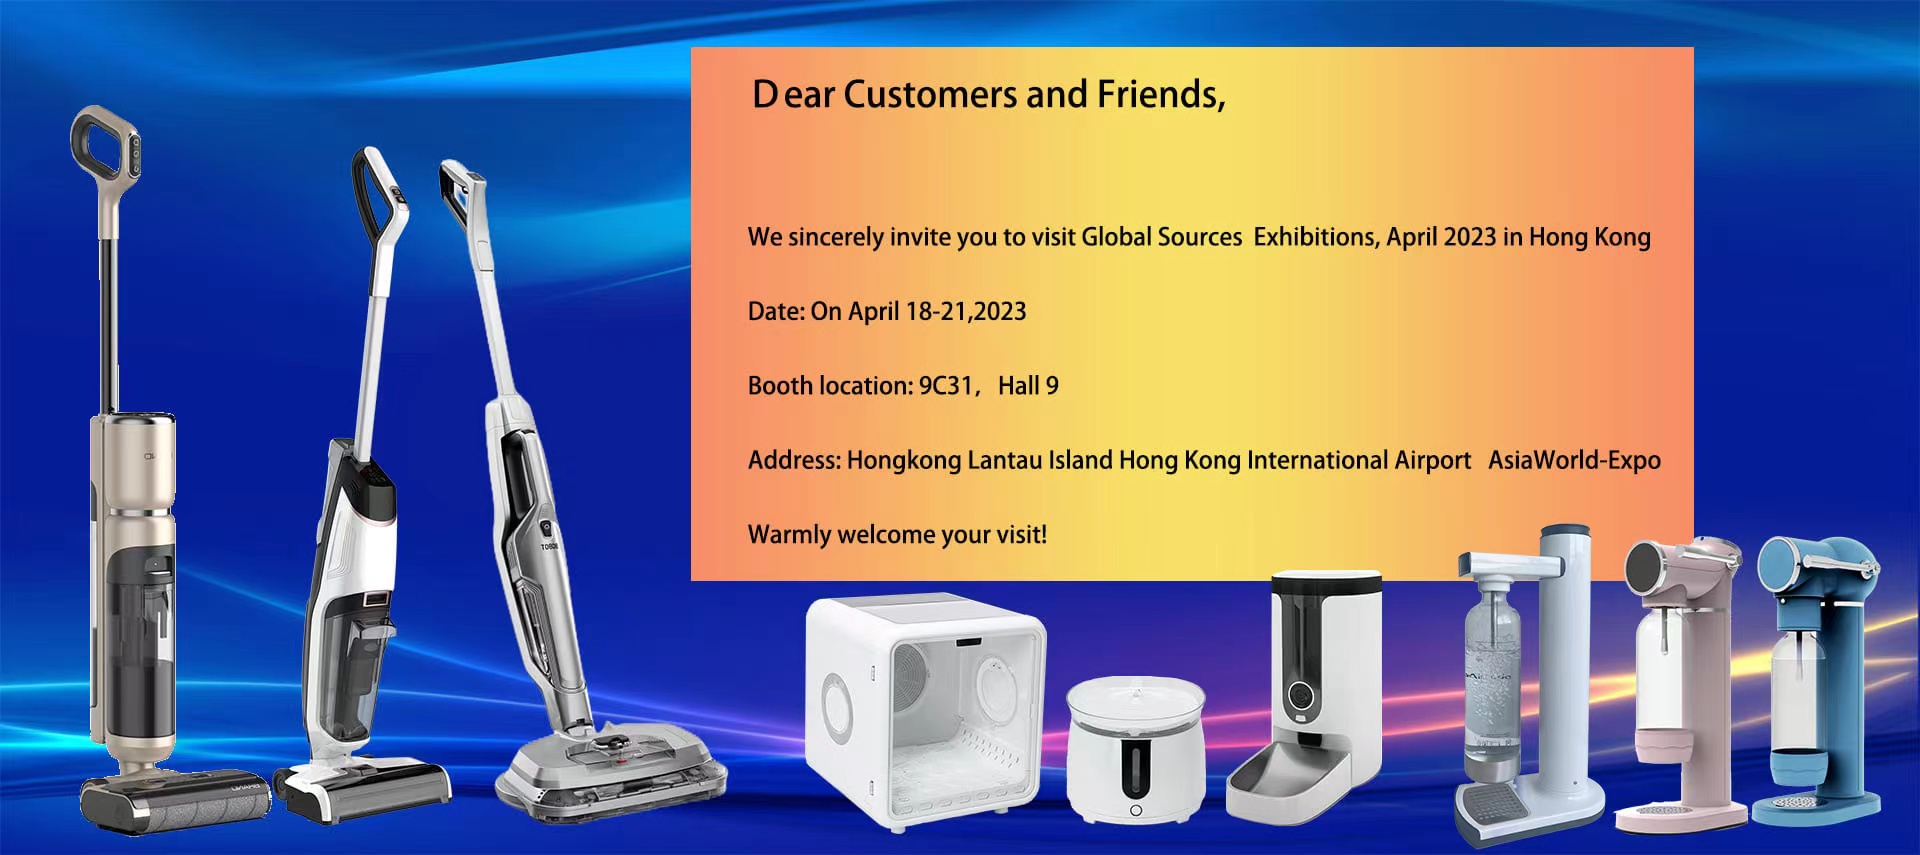 Bengbu MiFan Technology Co., Ltd Invites Visitors to Explore Innovative Cleaning Tools at Global Sources Exhibitions in Hong Kong - Notícias da empresa - 3